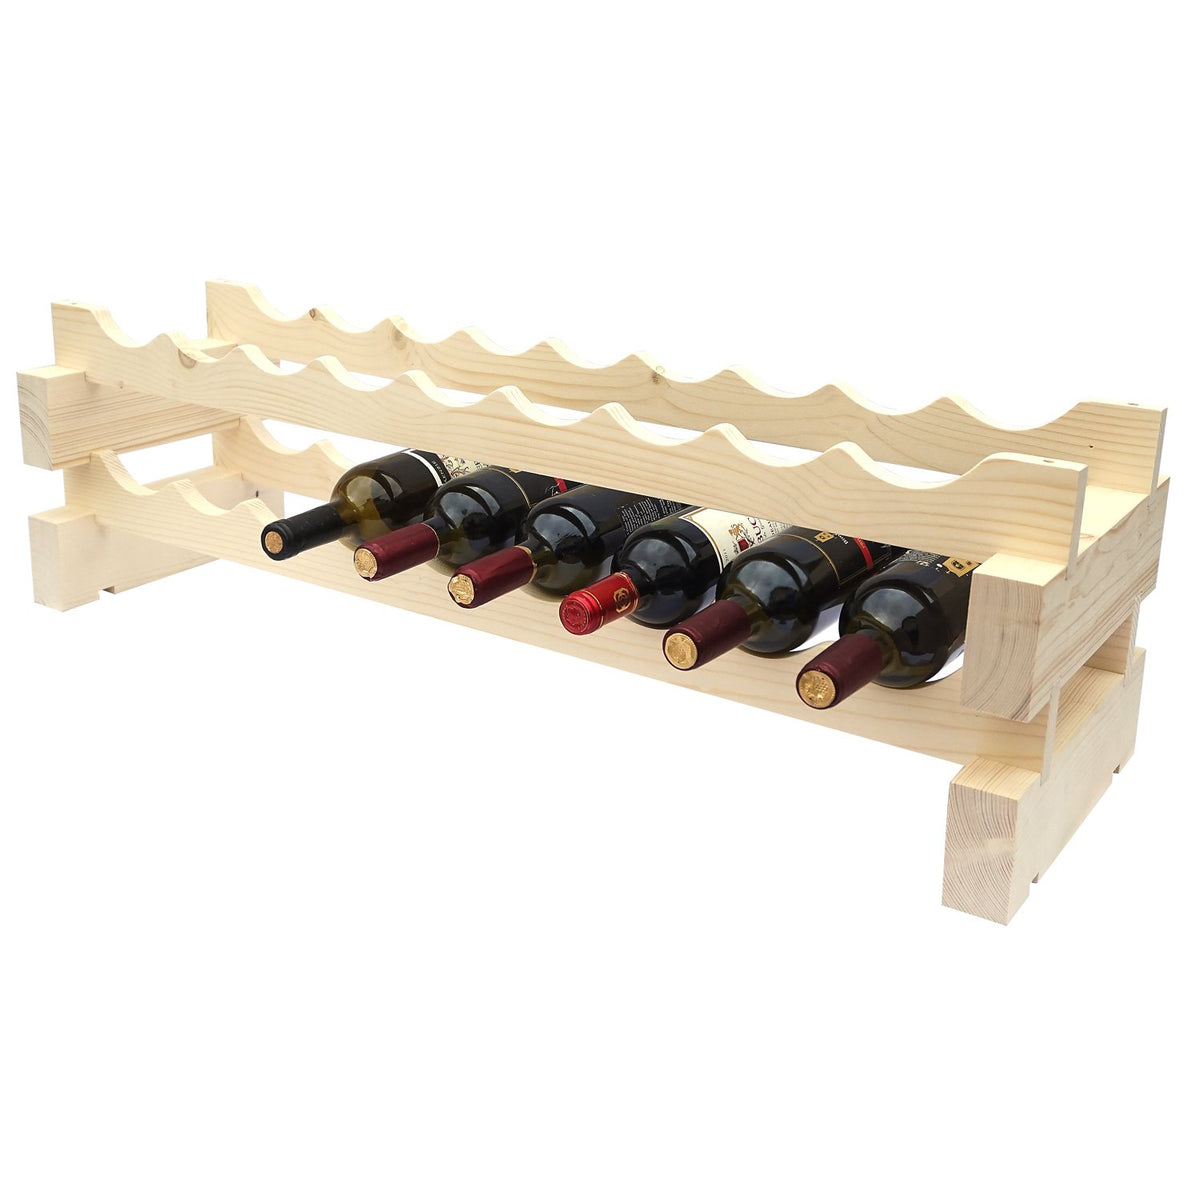 9 Bottle Modular Wine Rack Kit - New Zealand Pine - With Bottles - Two Layers